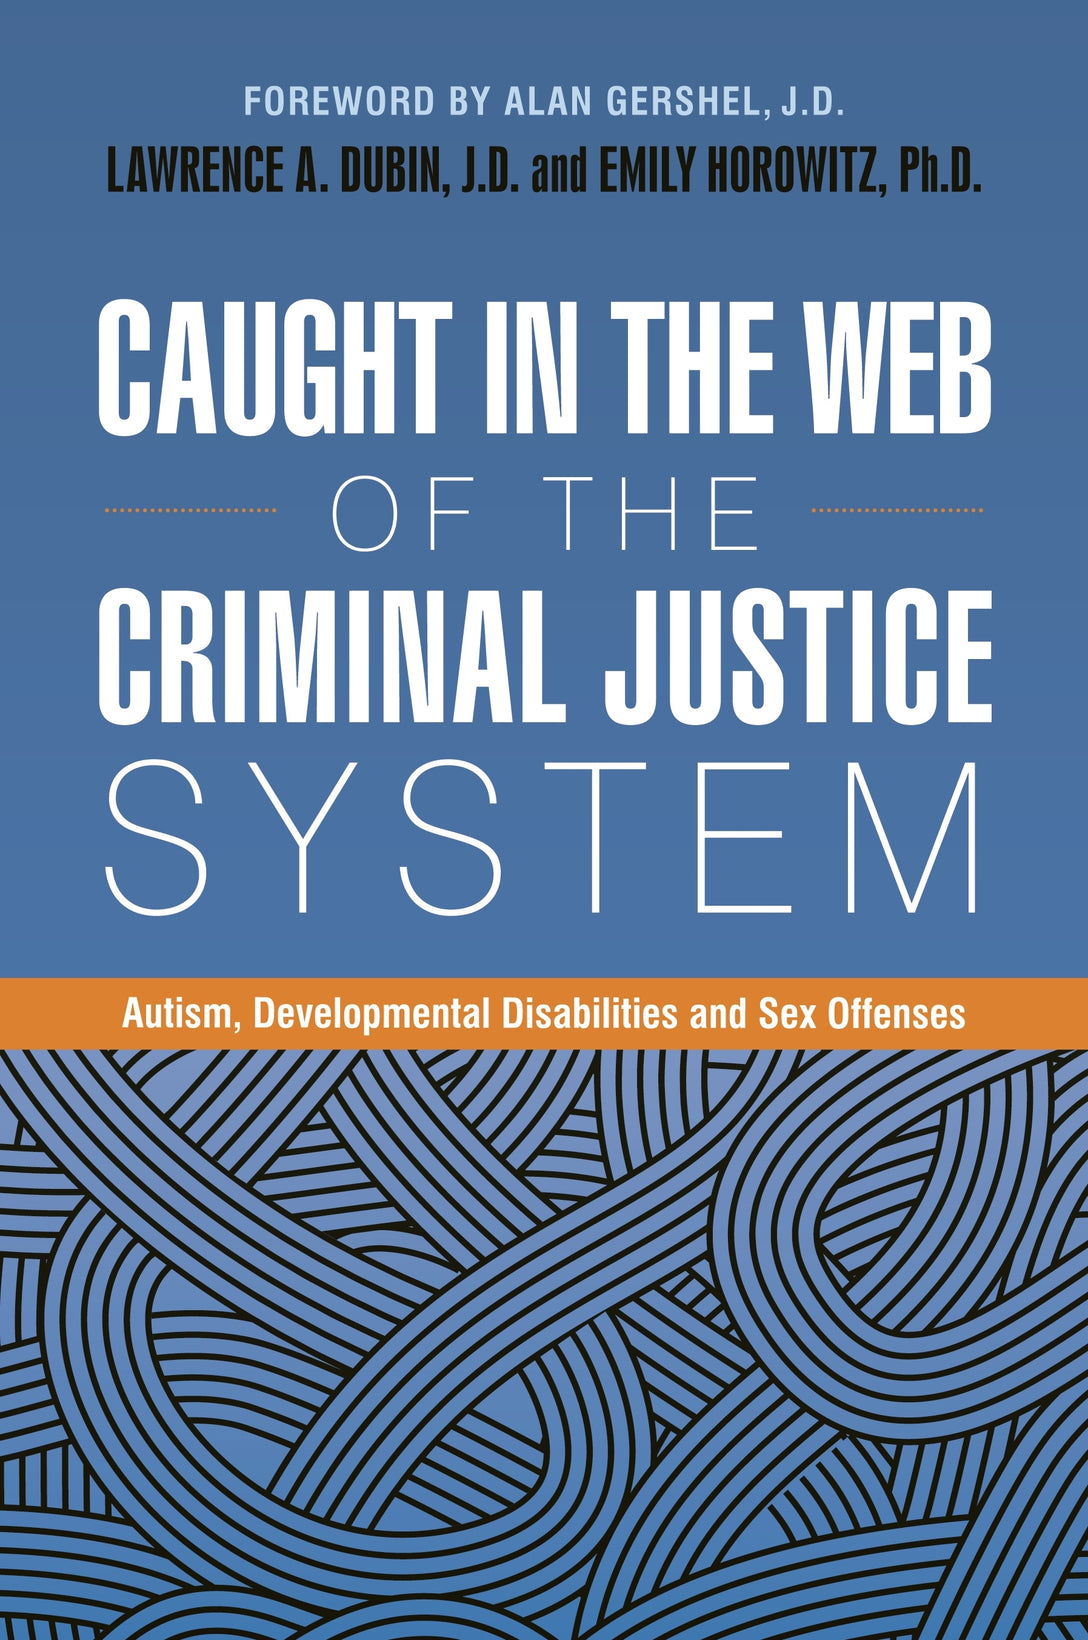 Caught in the Web of the Criminal Justice System by Lawrence A. Dubin, J.D., Emily Horowitz, Ph.D., Dr Anthony Attwood, Alan Gershel, No Author Listed